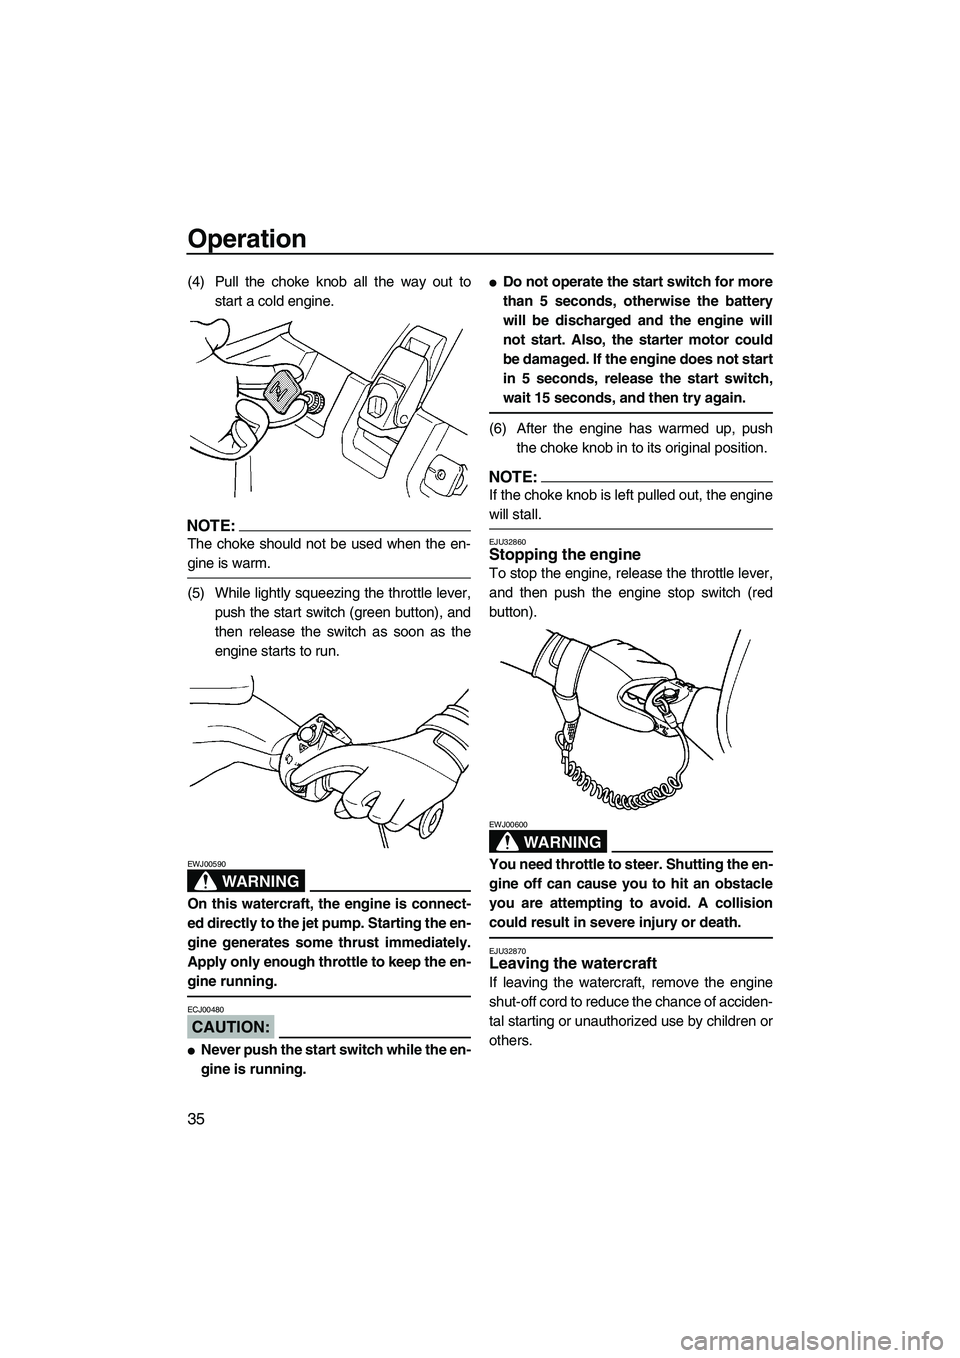 YAMAHA SUPERJET 2008  Owners Manual Operation
35
(4) Pull the choke knob all the way out to
start a cold engine.
NOTE:
The choke should not be used when the en-
gine is warm.
(5) While lightly squeezing the throttle lever,
push the star